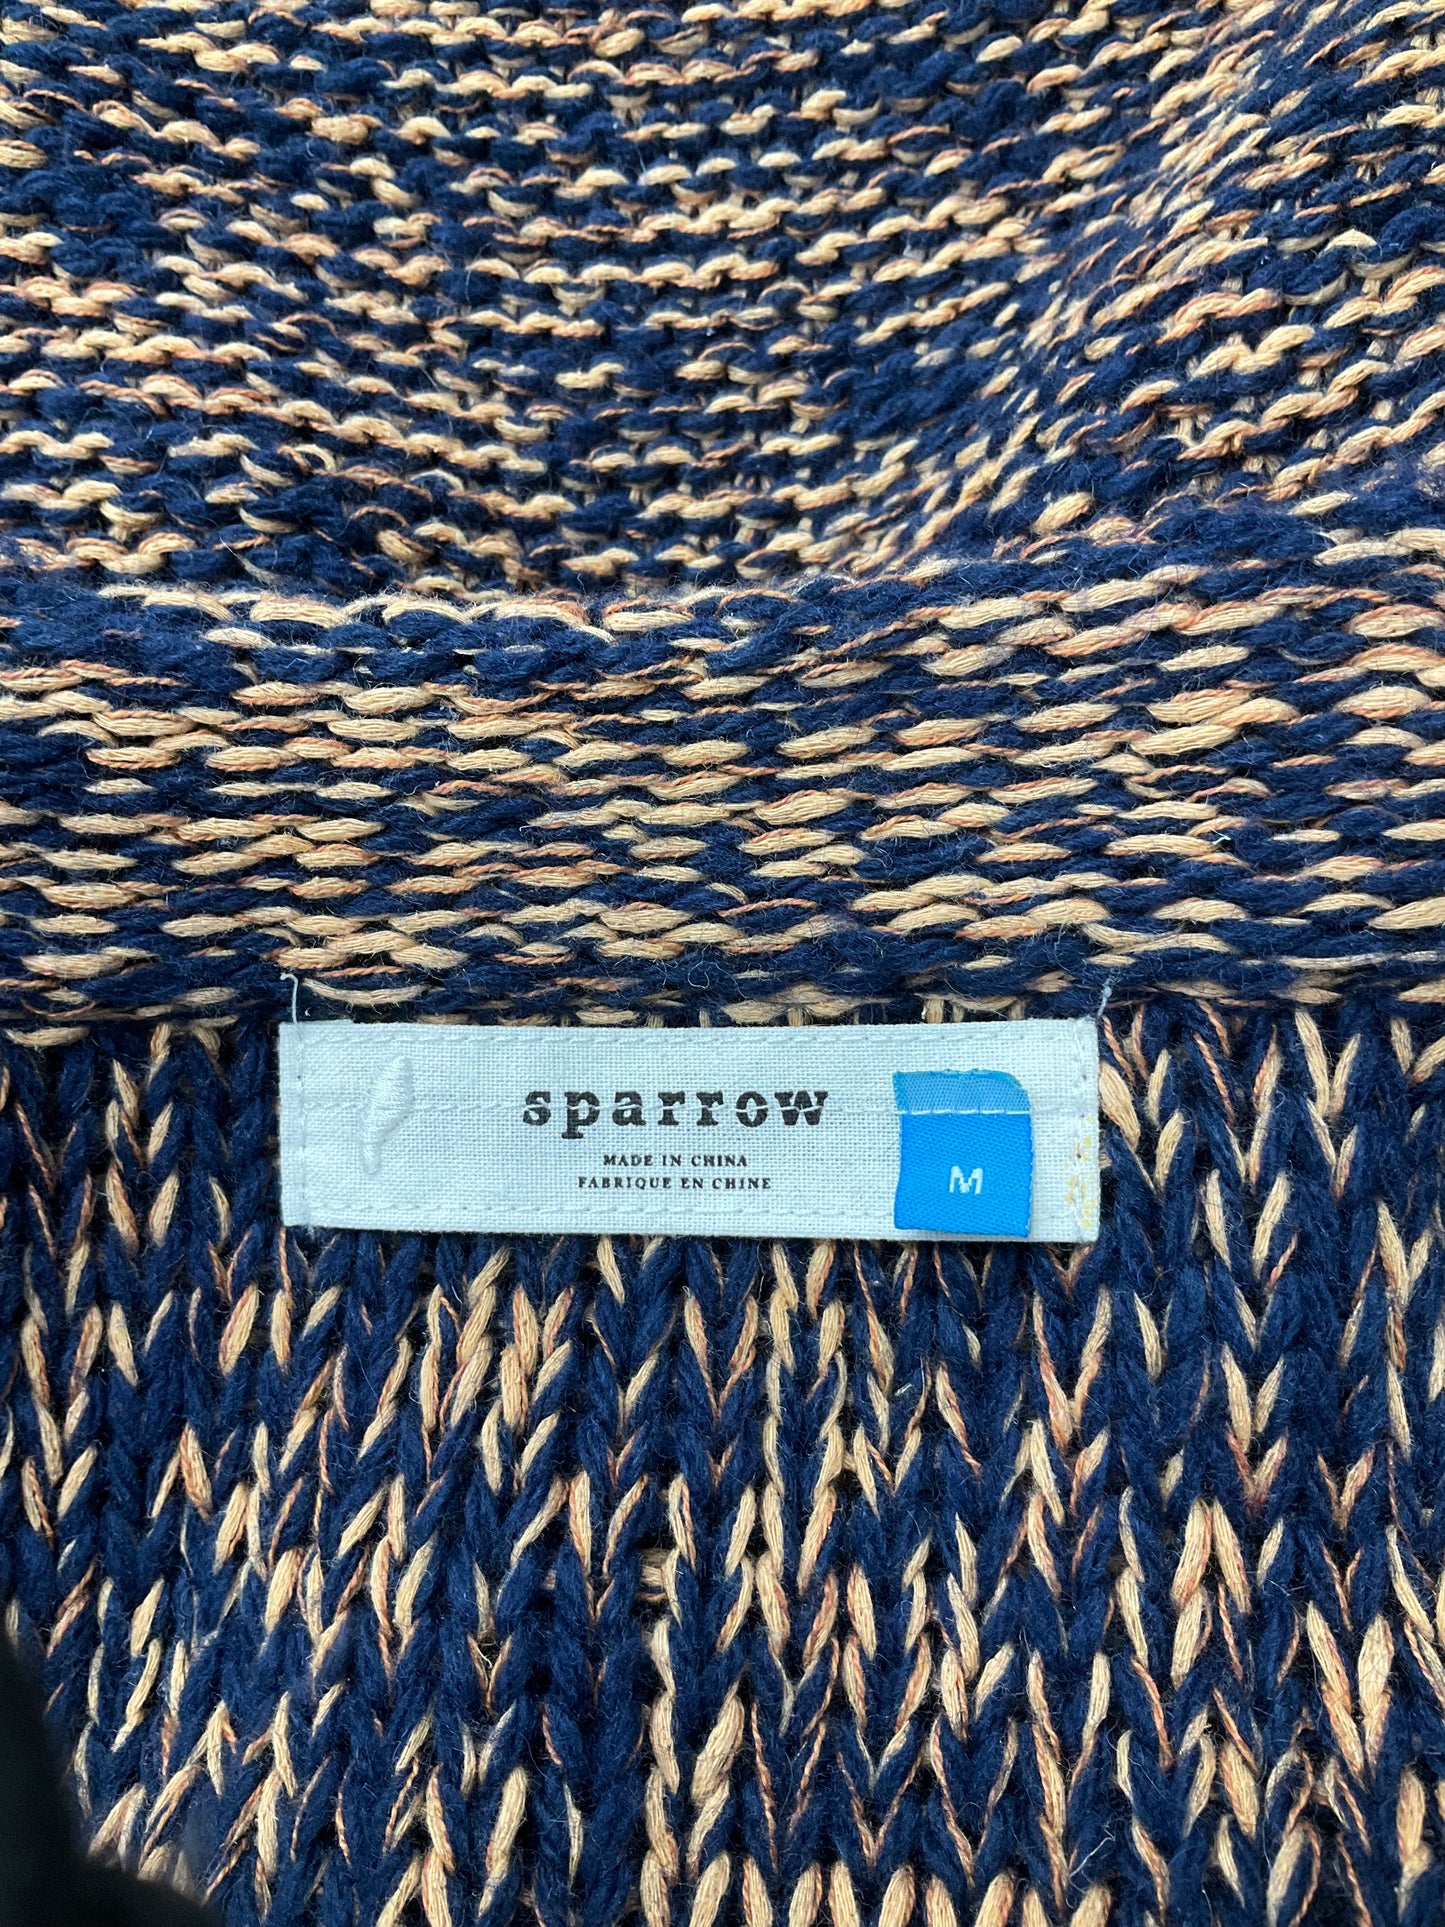 Sweater Cardigan By Sparrow  Size: M